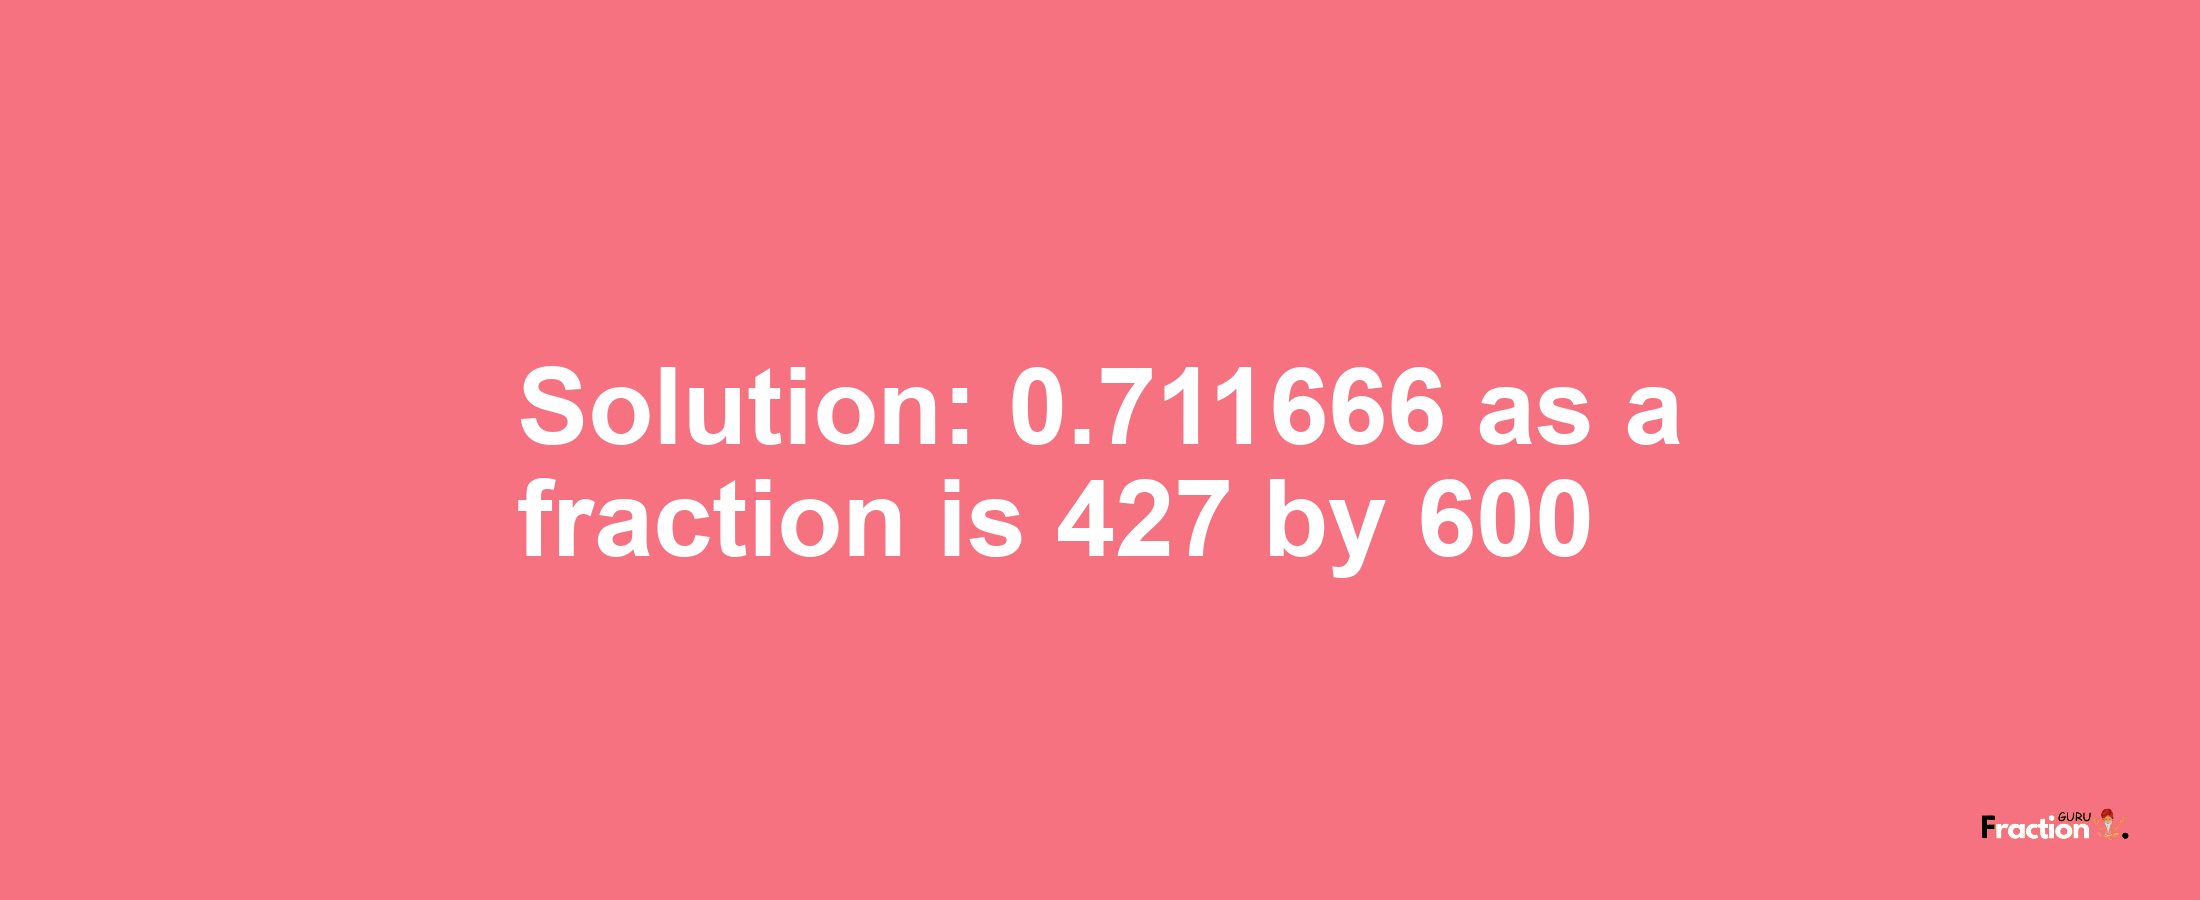 Solution:0.711666 as a fraction is 427/600